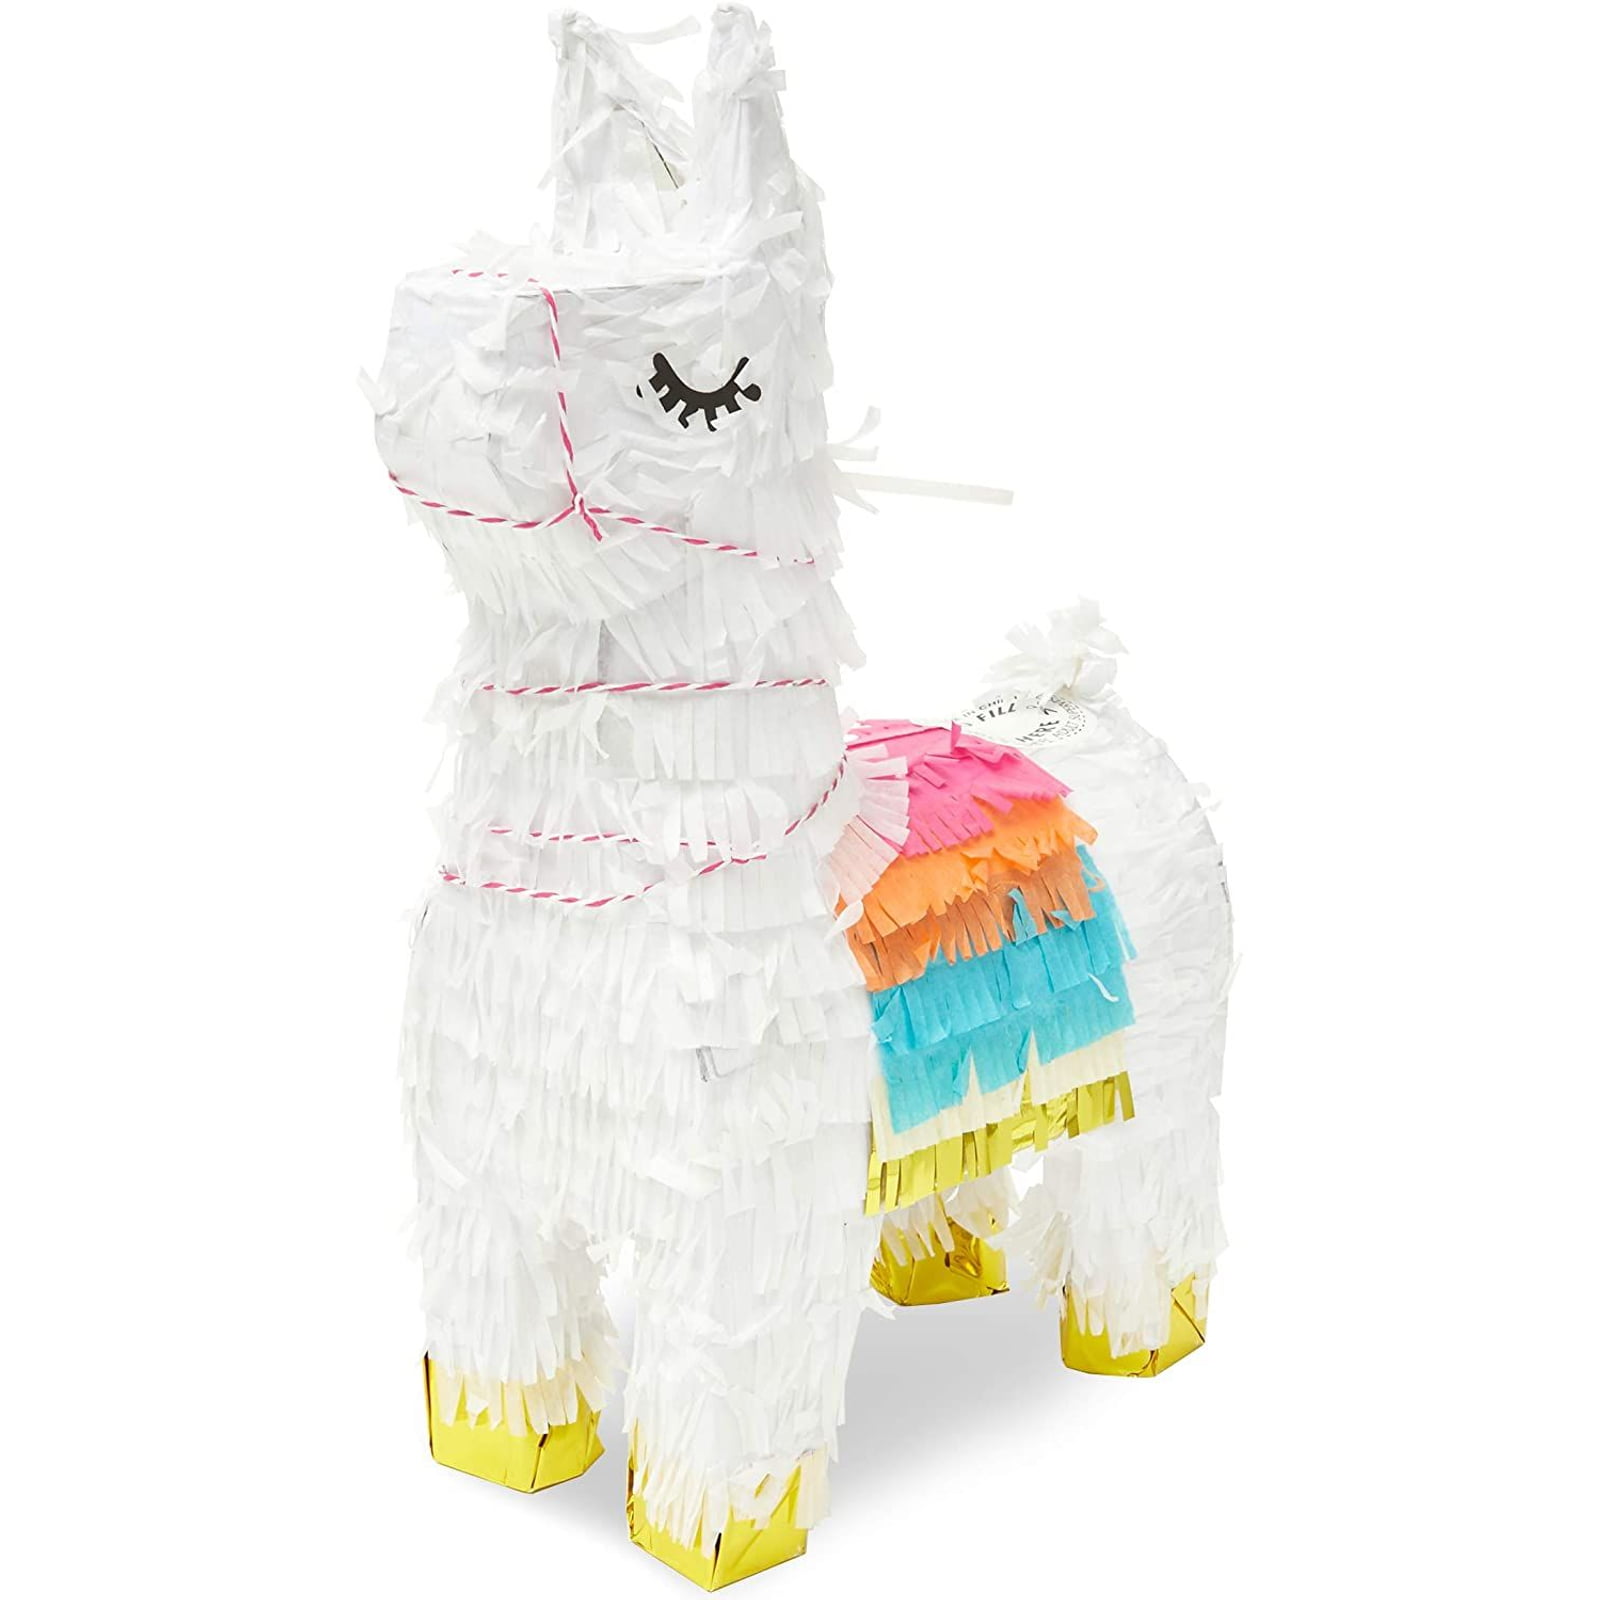 Holds up to 2 Pounds of Filler Party City Llama Pinata Features an Adorable Llama with a Blanket and Pom-Poms